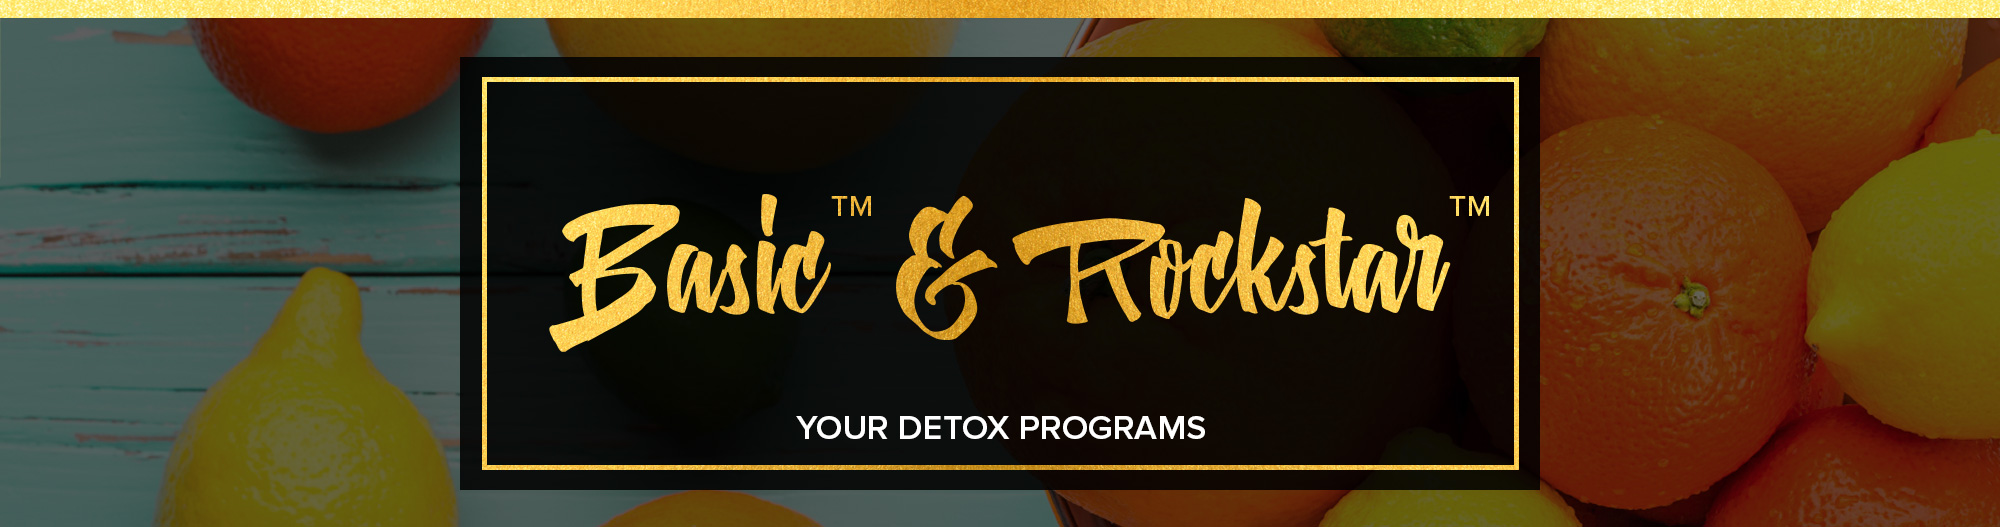 Done For You Programs for Health Coaches Sneak Peek